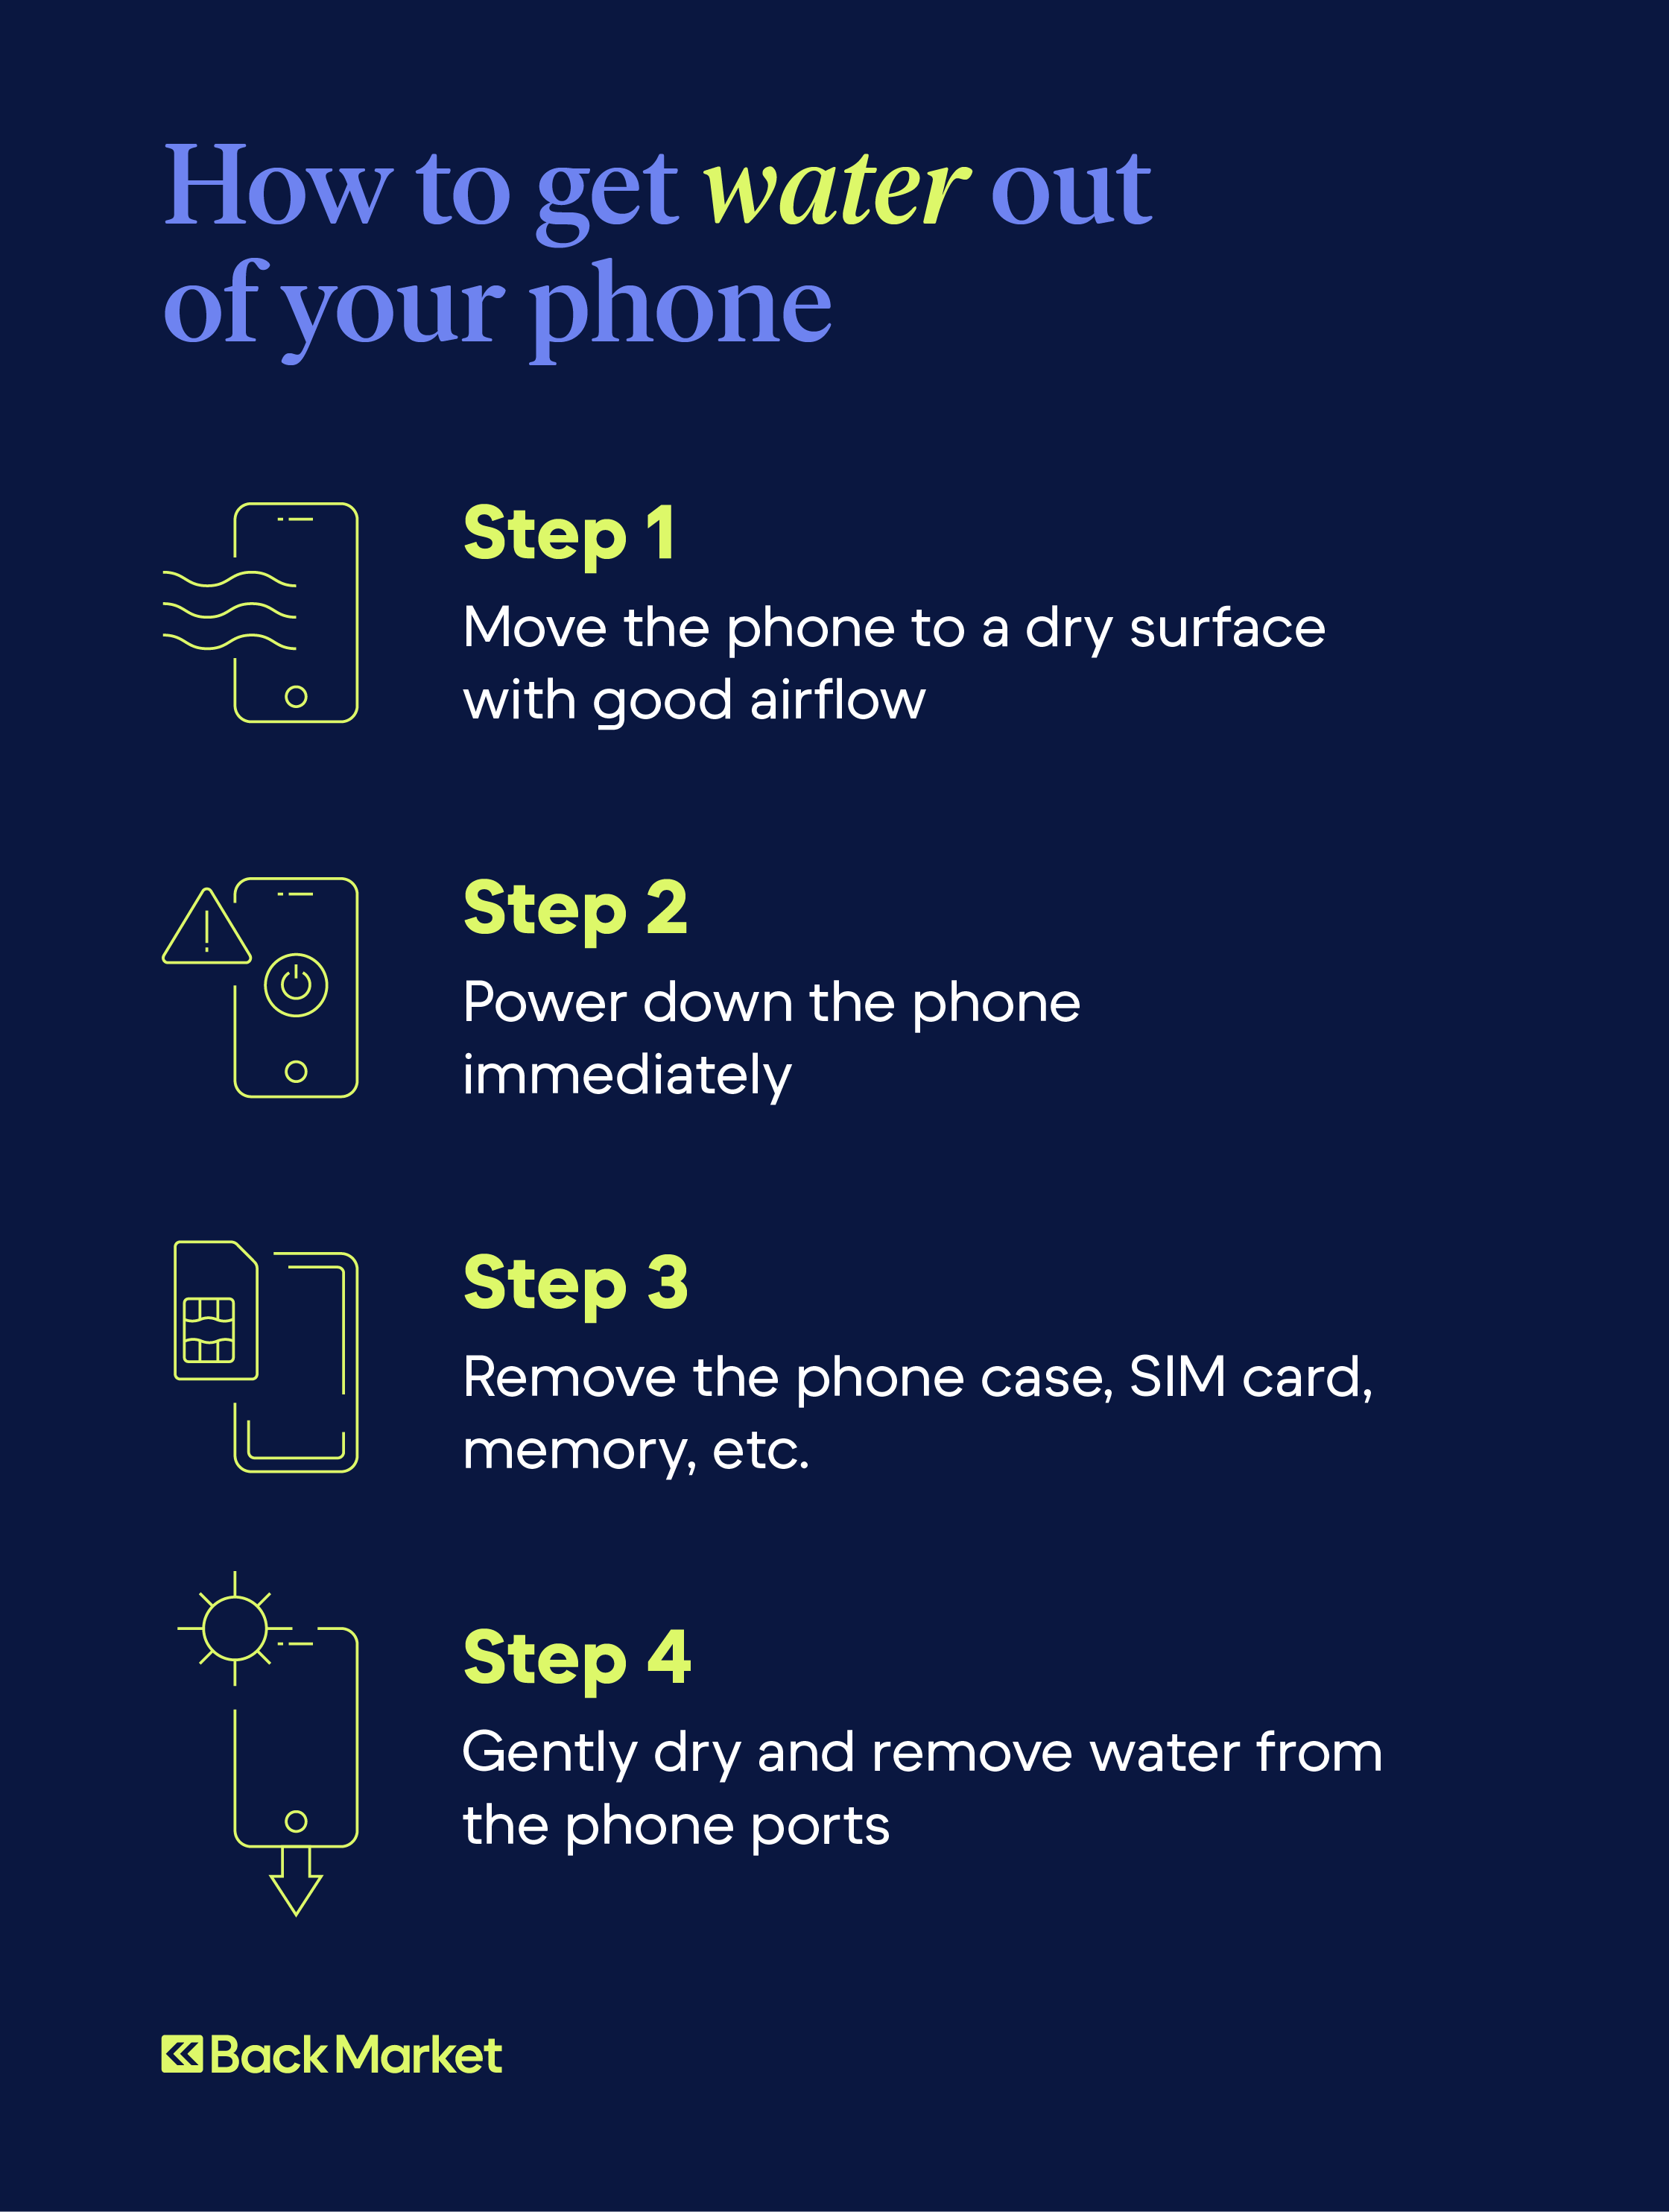 A graphic shows how to get water out of phone in four steps.